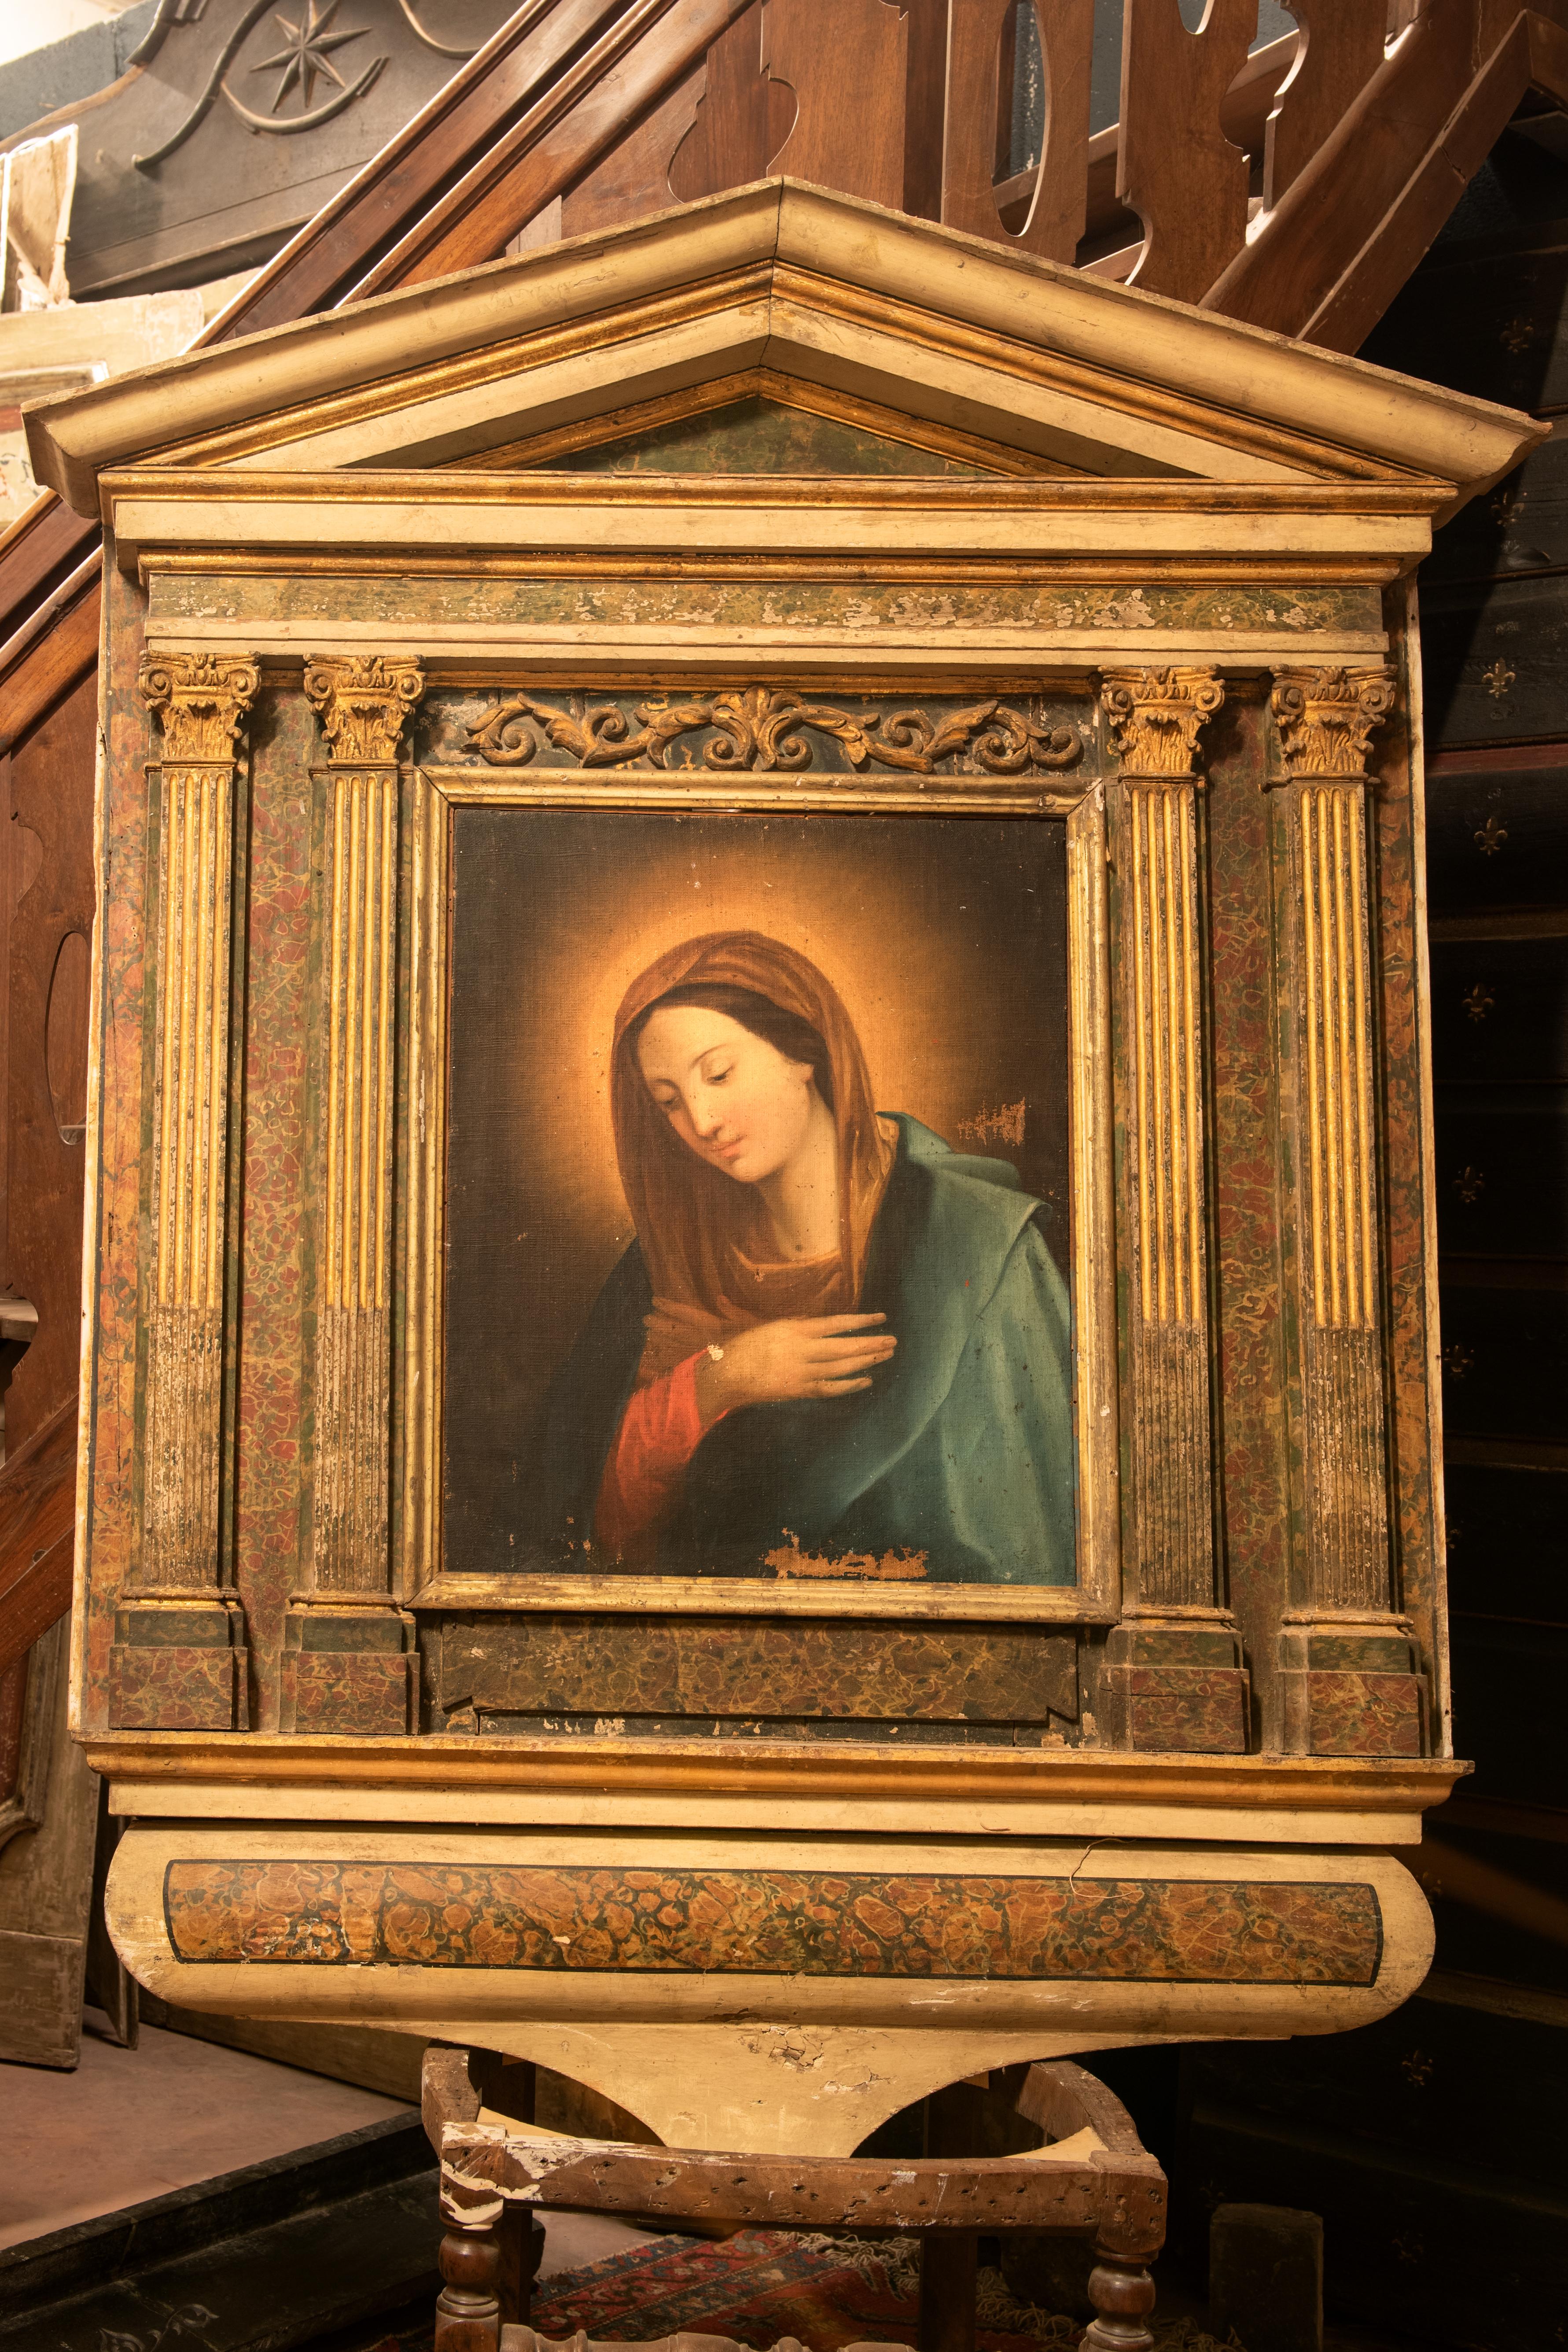 Ancient altarpiece in carved and painted wood, depicting the Madonna painted on canvas, frame with gilded painted wooden columns, 18th century, from an Italian church, measuring cm W 145 x H 167.
Possibility of using it in a different way, as wall